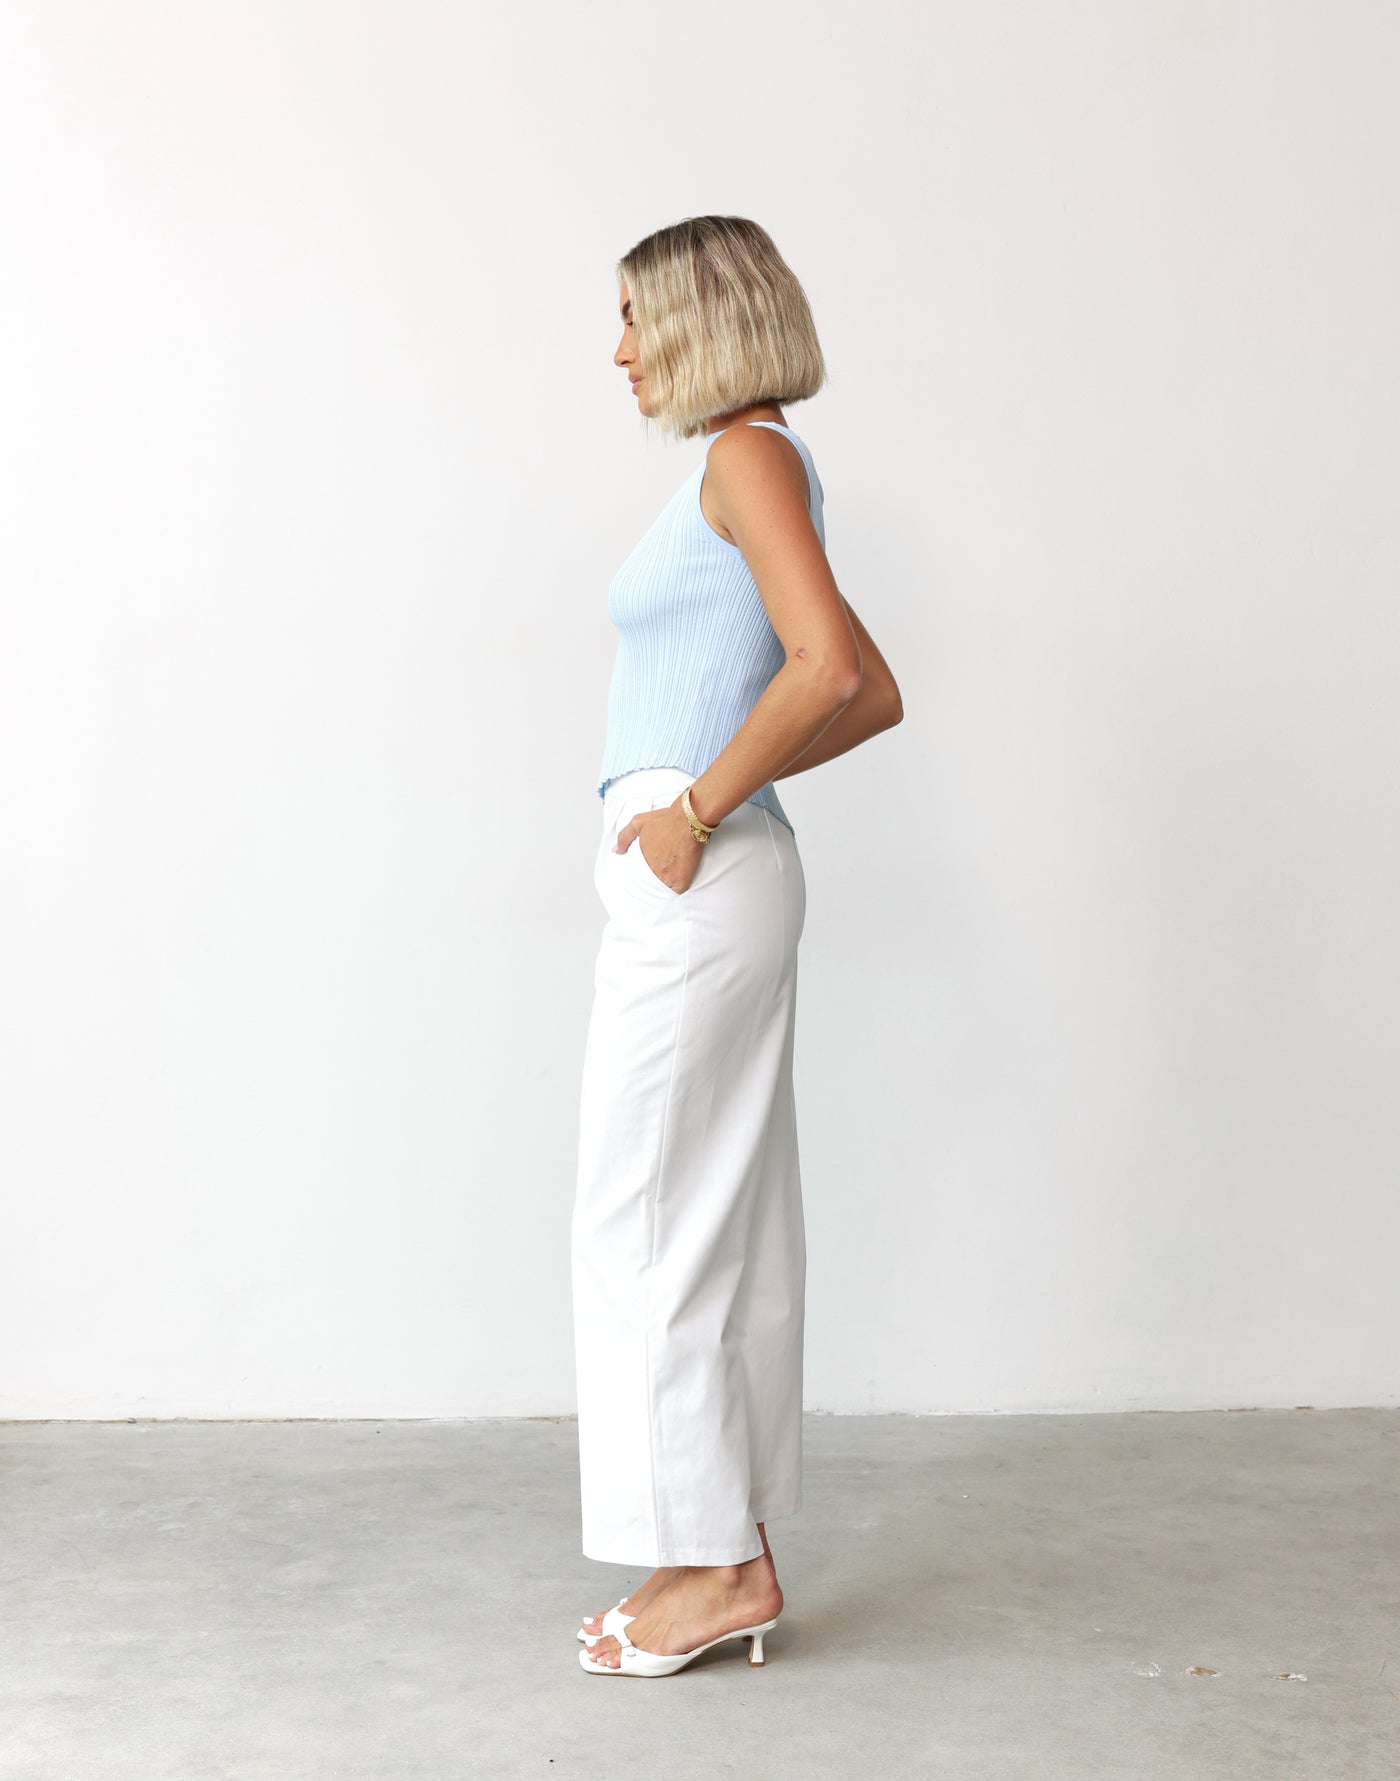 Kristella Pants (White) - High Waisted Linen Look Lined Pants - Women's Pants - Charcoal Clothing